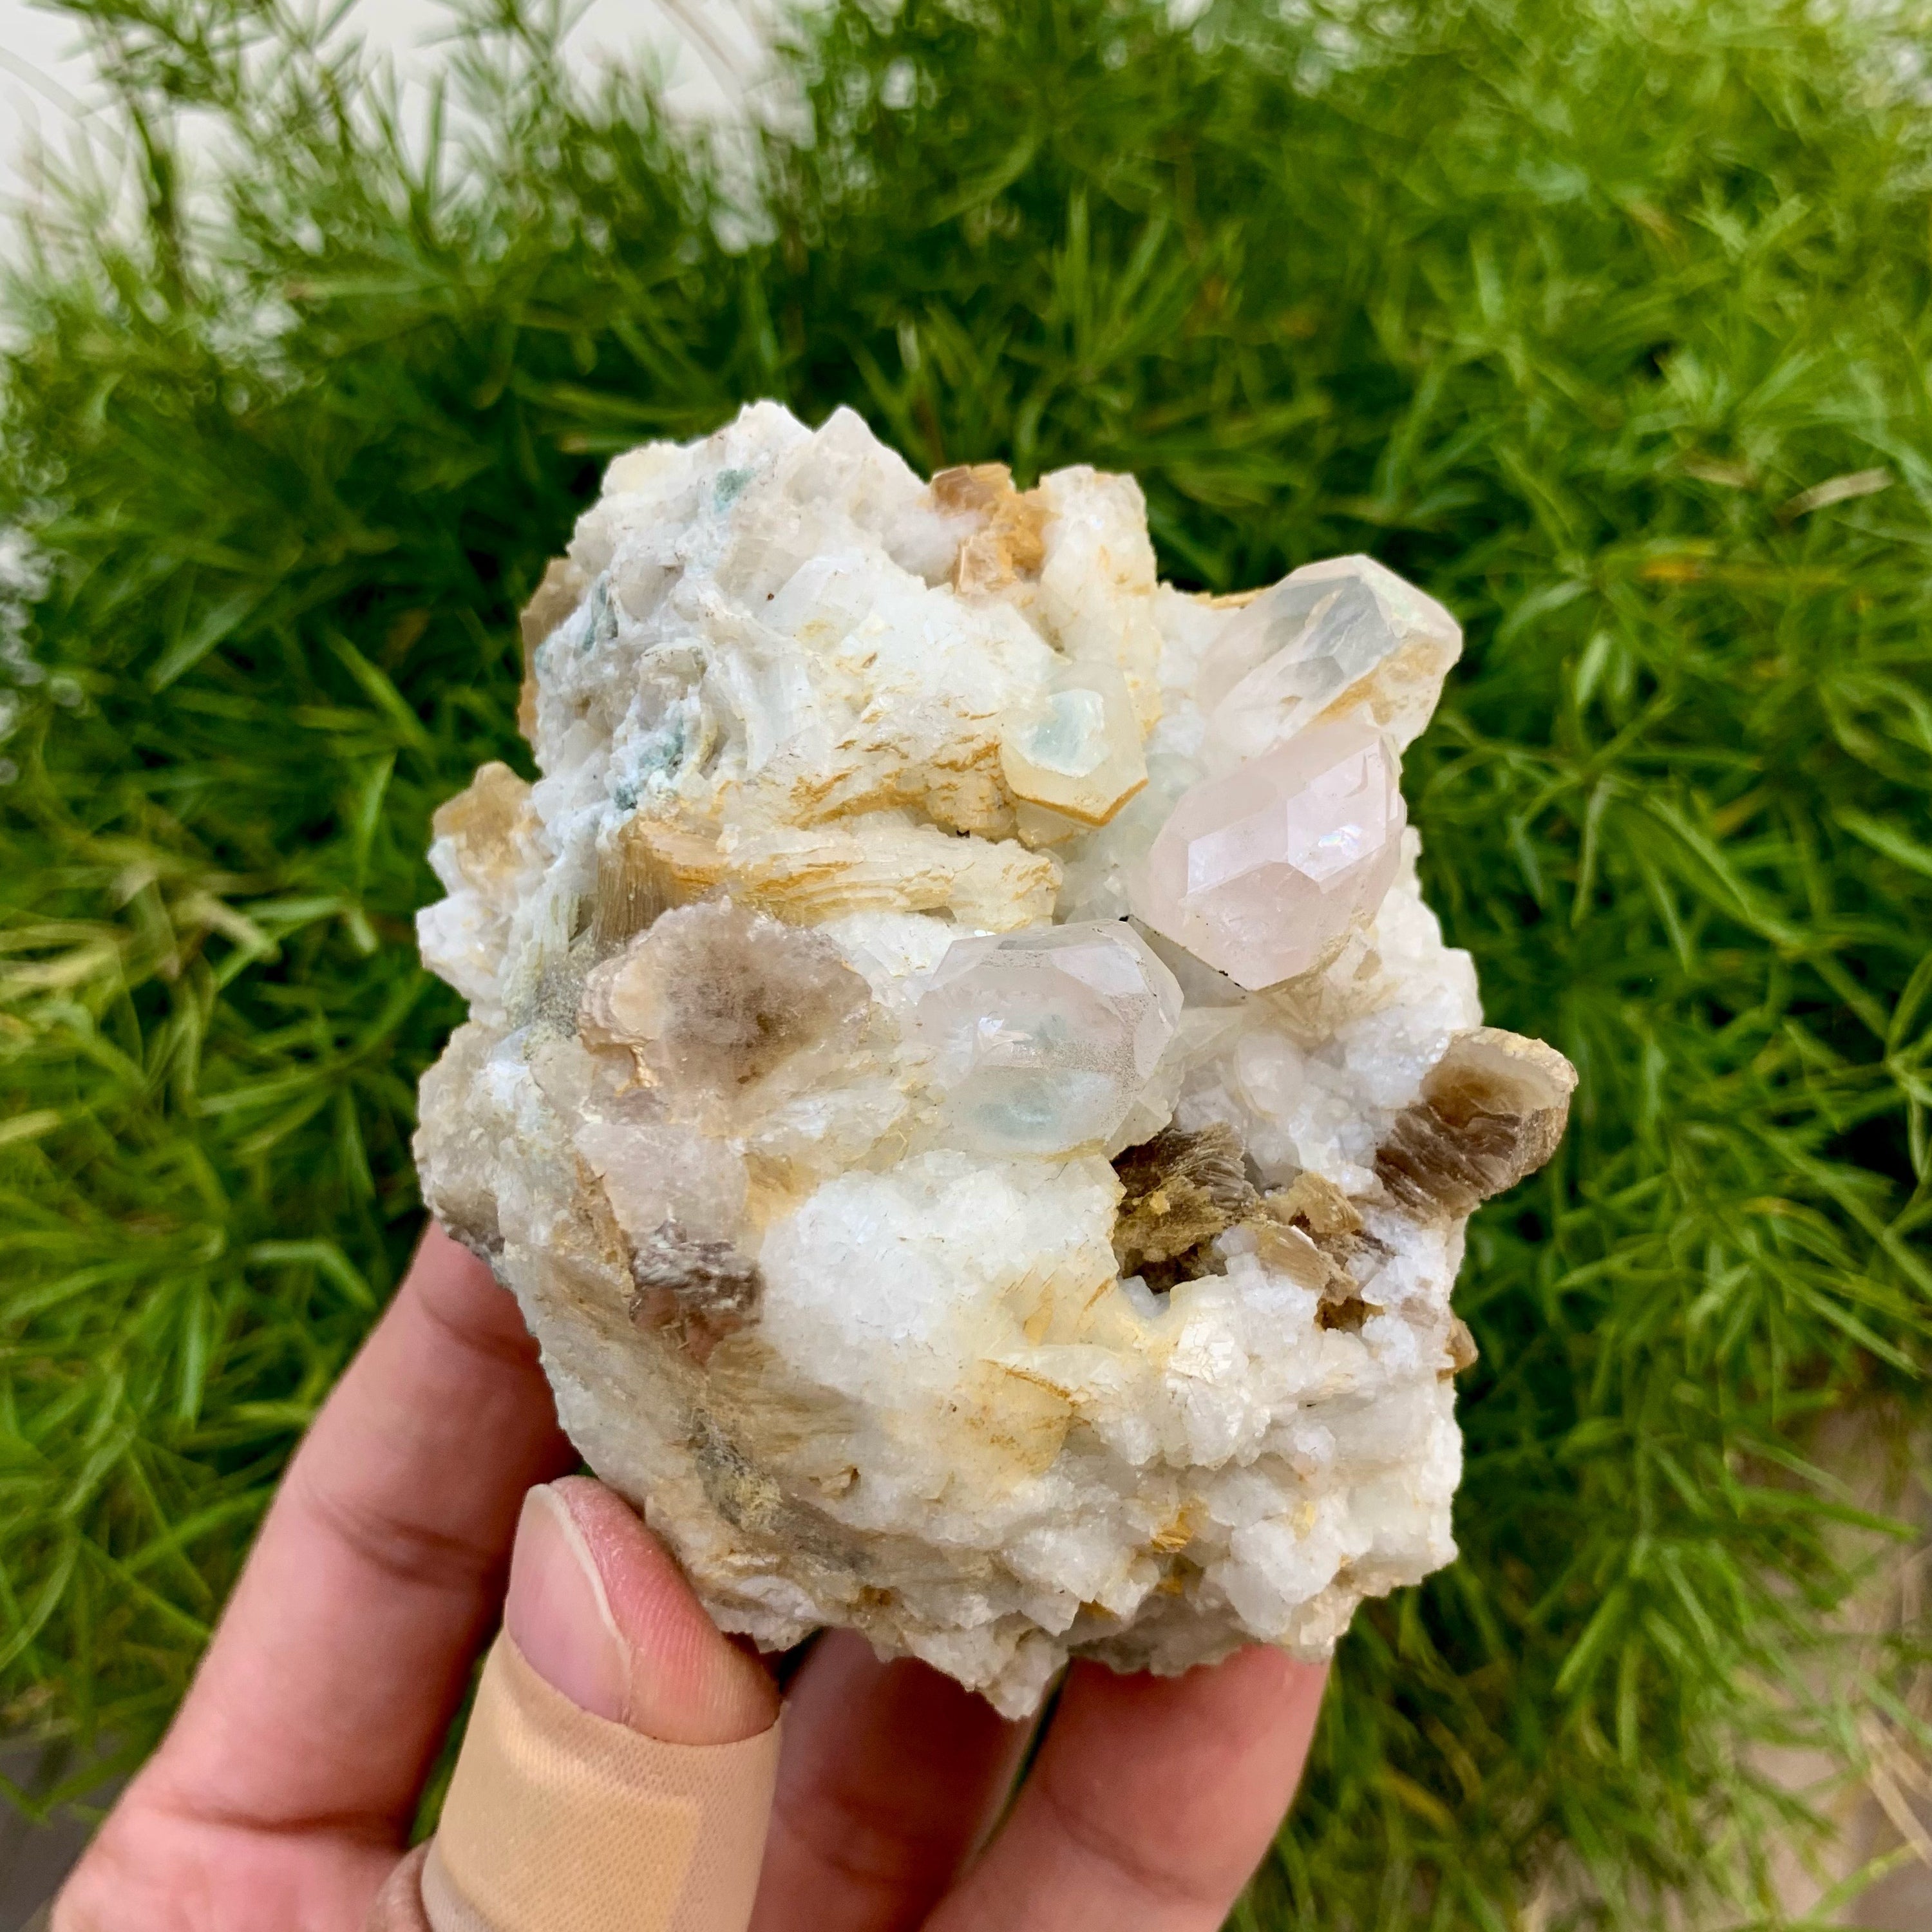 Lovely Morganite Crystals With Muscovite Nicely Positioned On White Albite Matrix